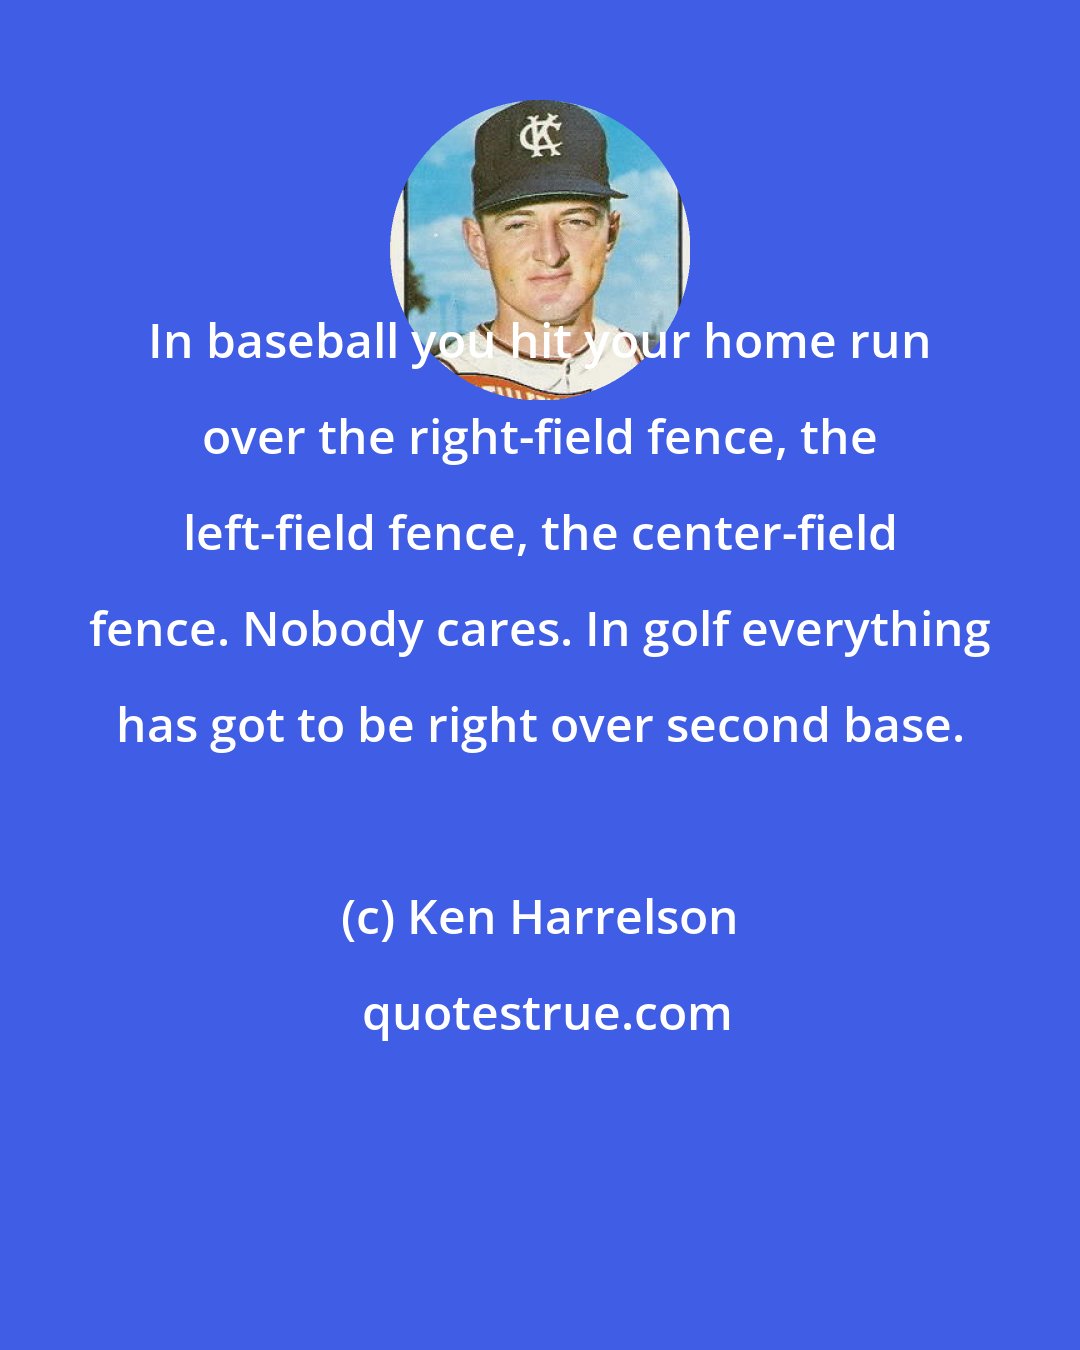 Ken Harrelson: In baseball you hit your home run over the right-field fence, the left-field fence, the center-field fence. Nobody cares. In golf everything has got to be right over second base.